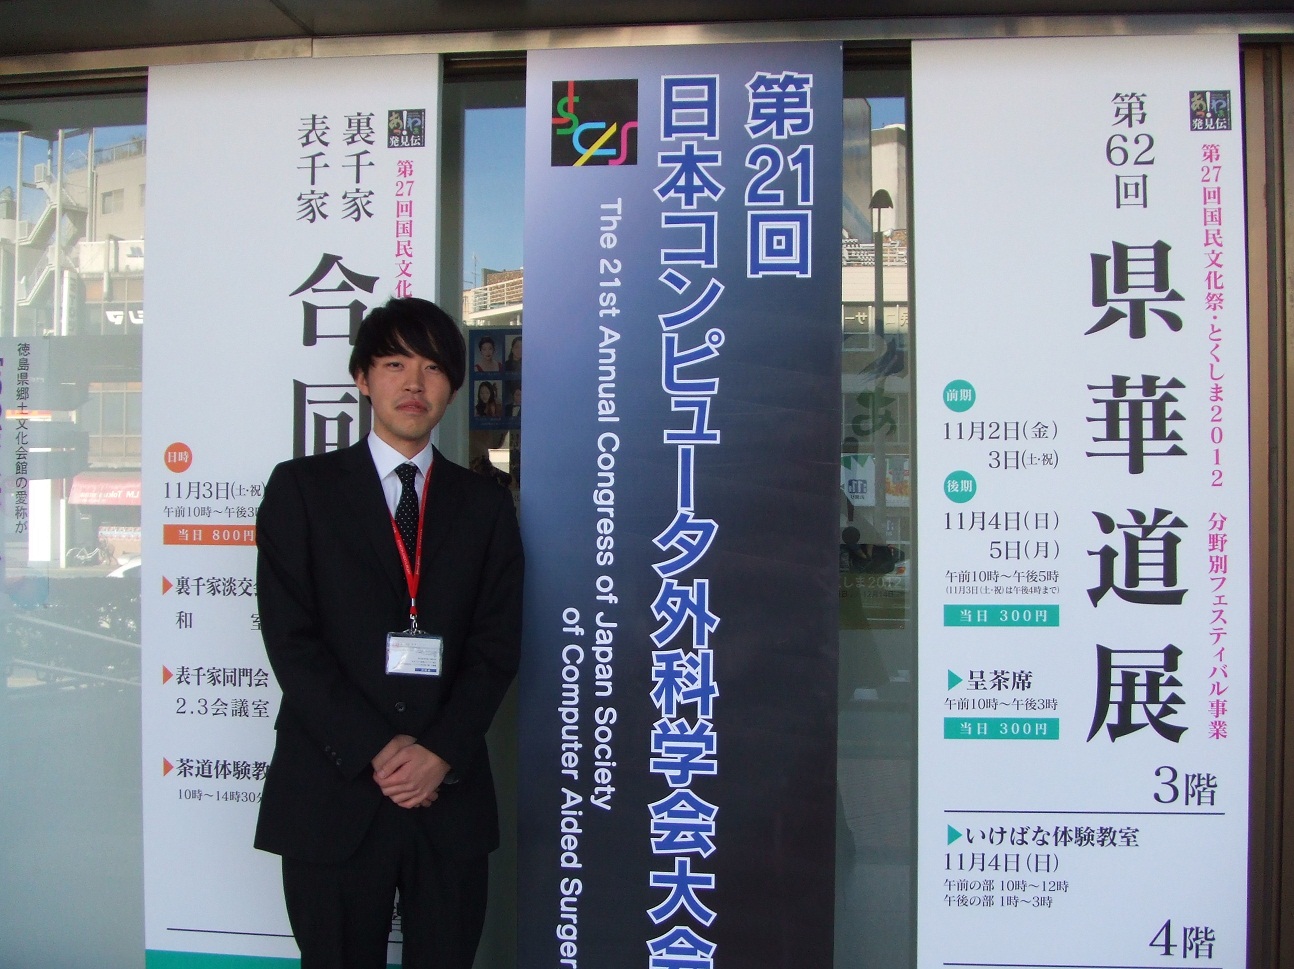 JSCAS2012@Tokushima_Which conference does he attend.